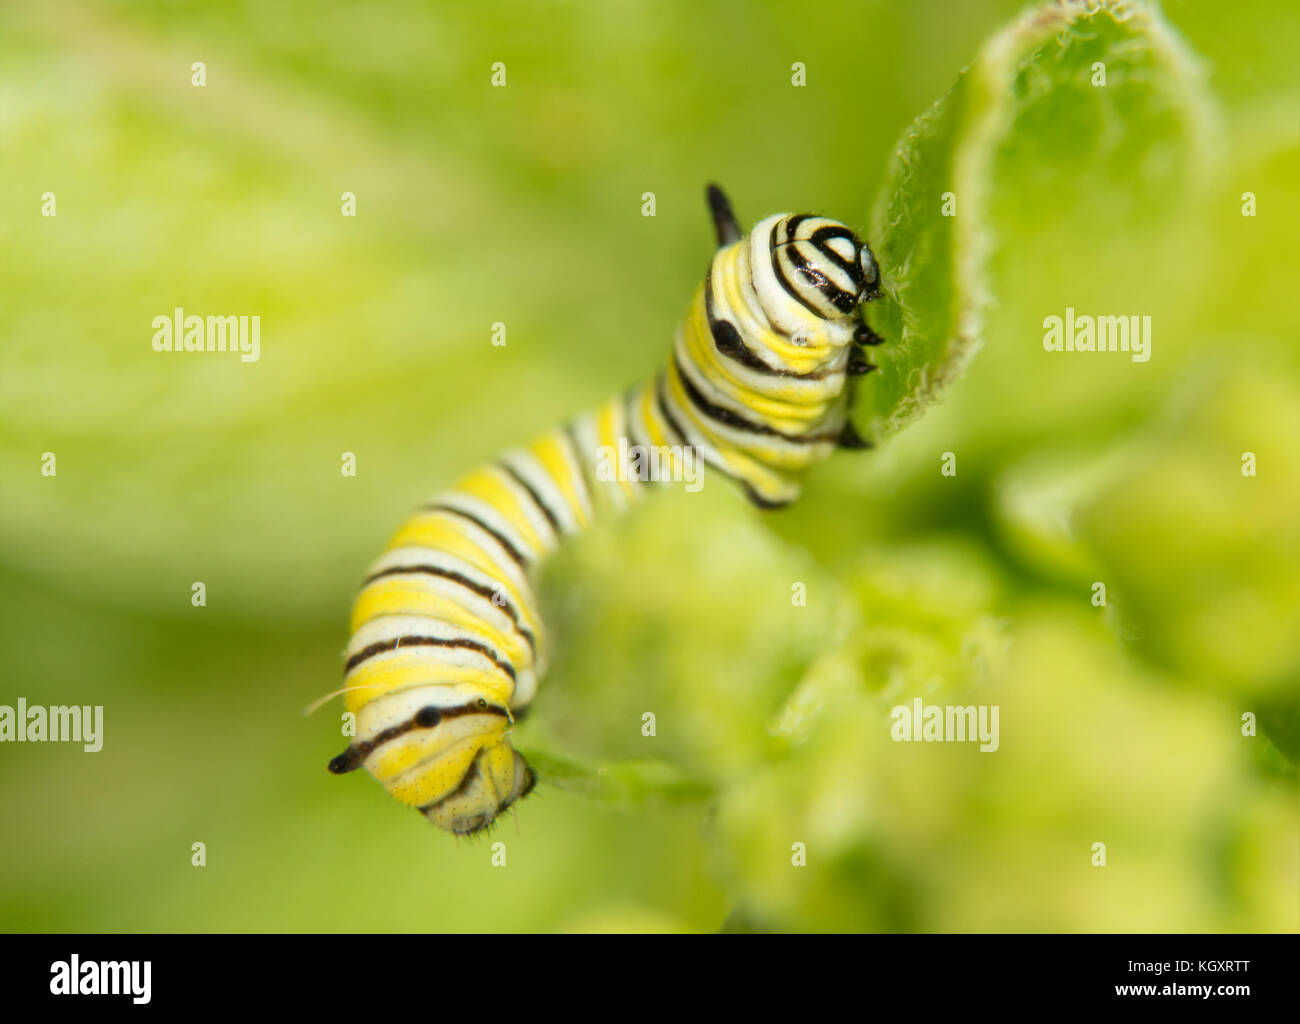 Second instar Monarch caterpillar eating a Milkweed leaf Stock Photo